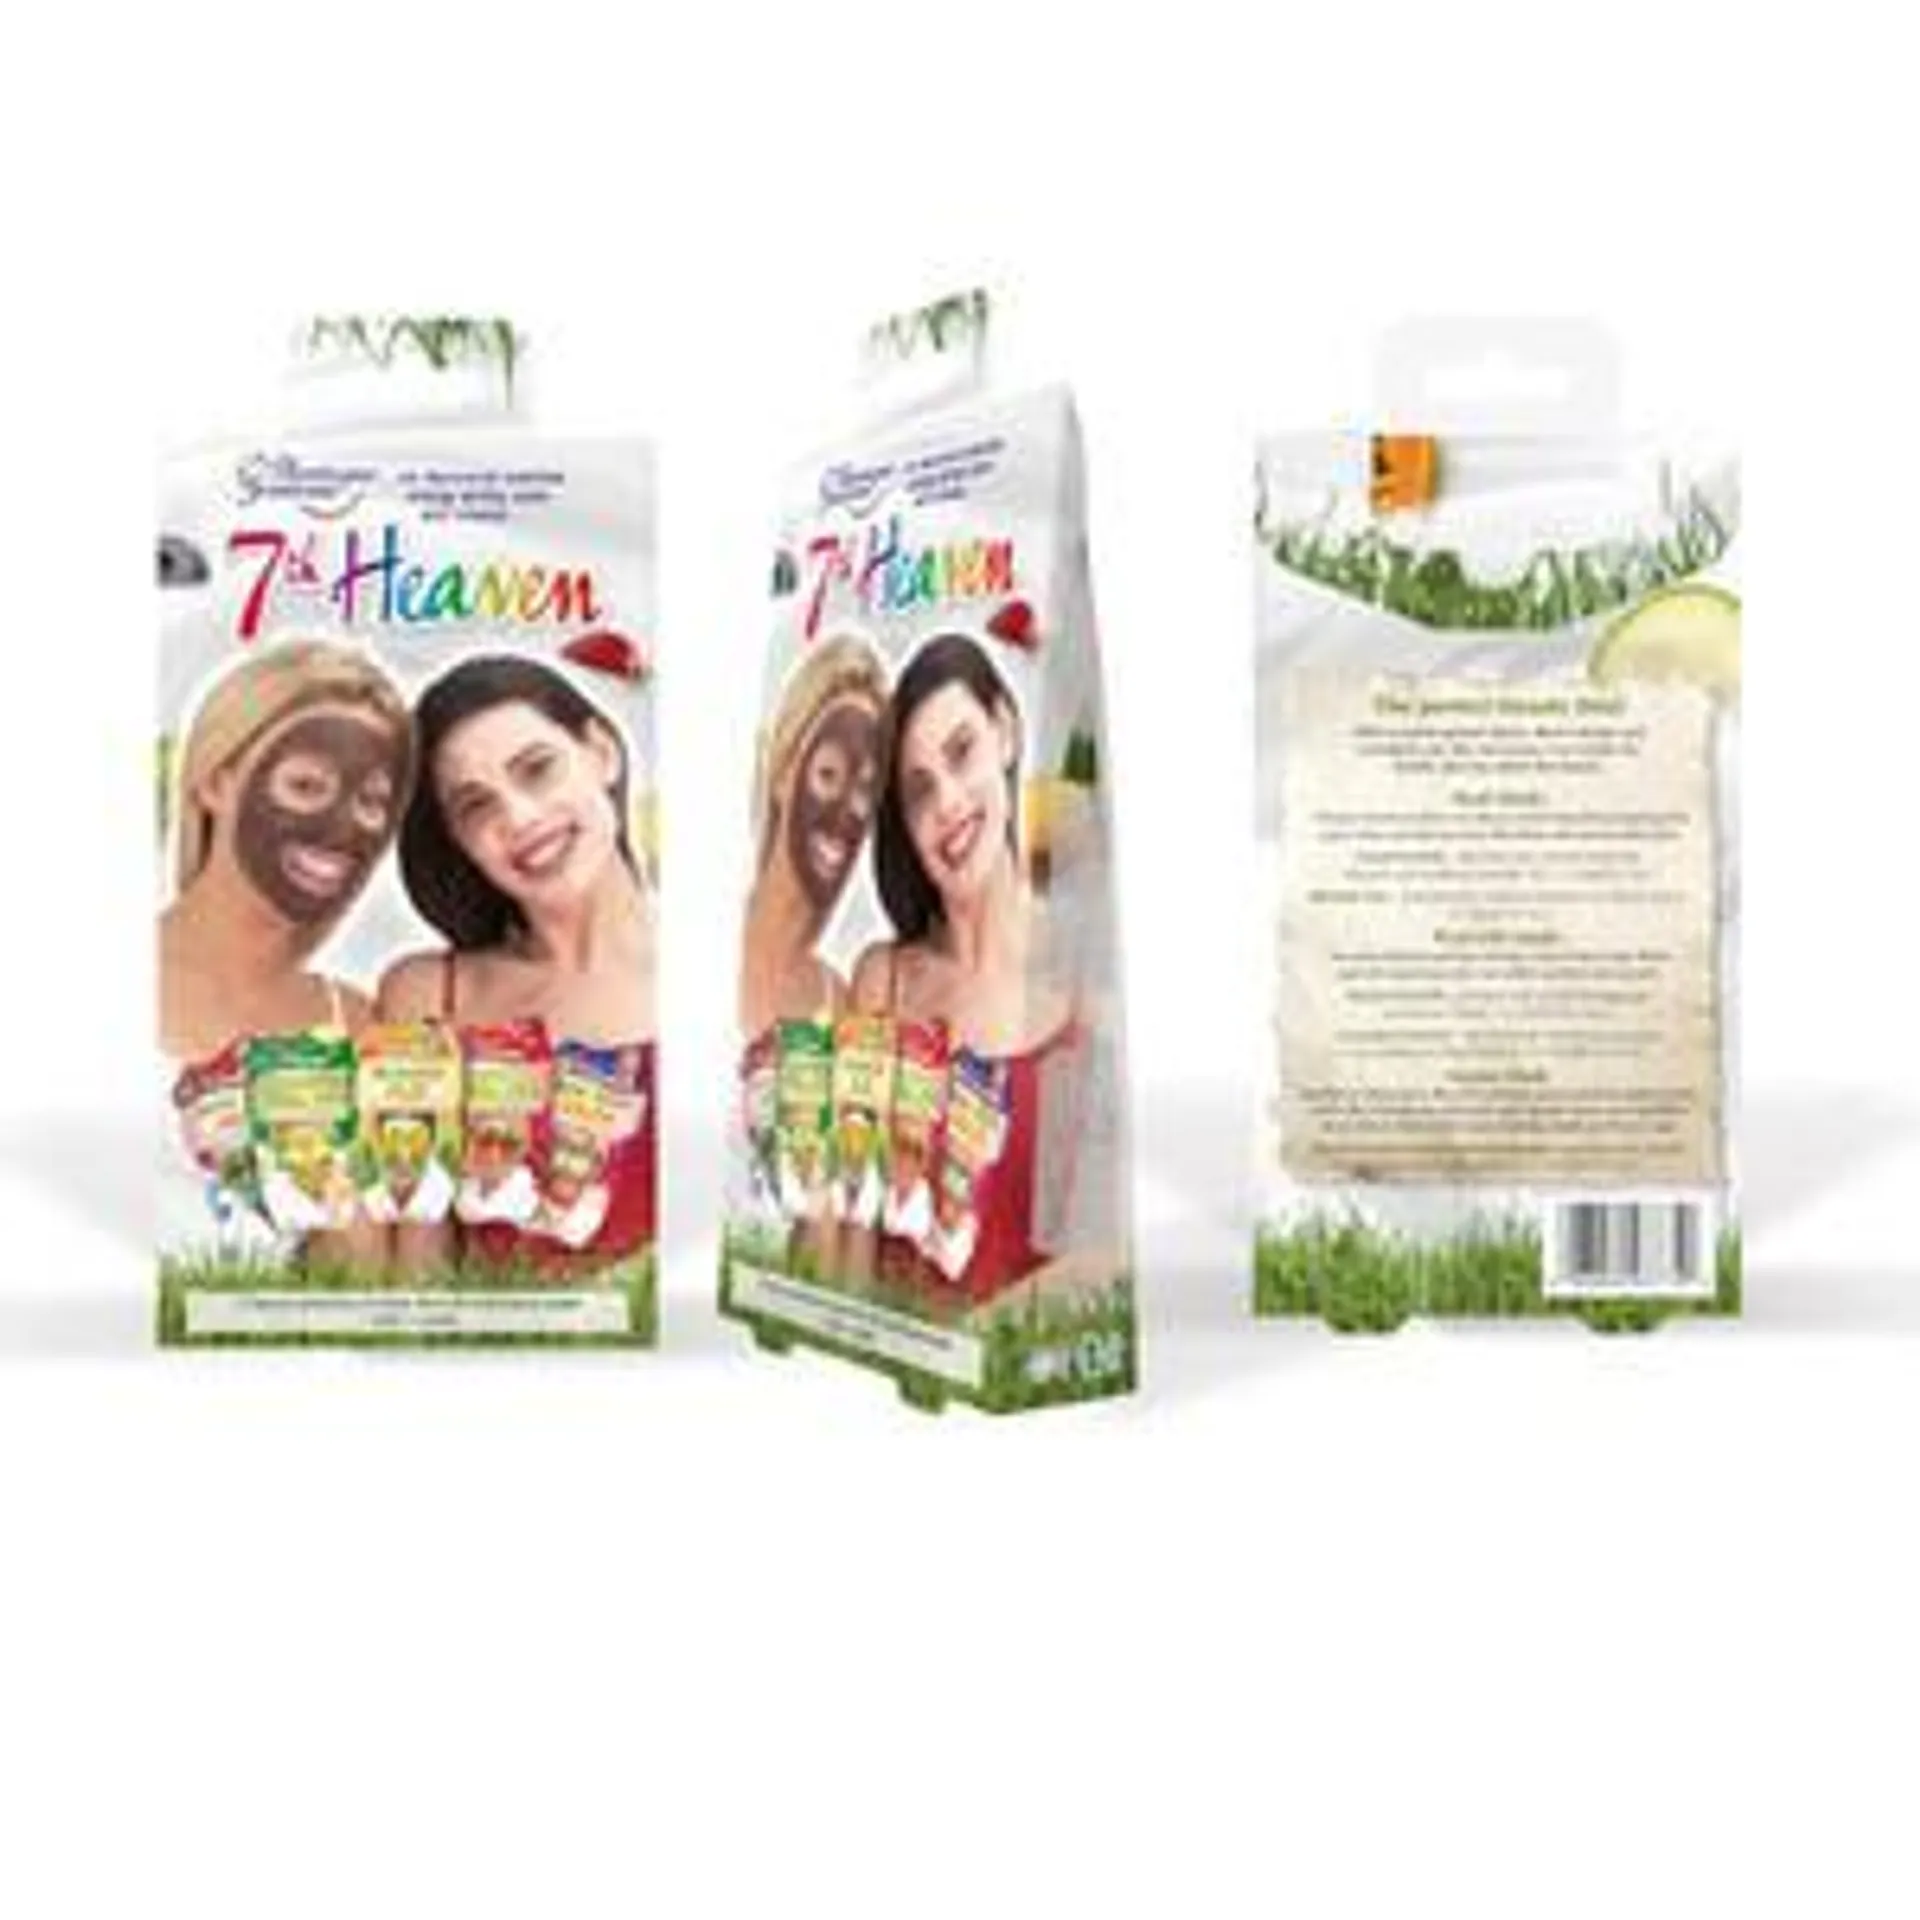 7th Heaven Assorted Face Mask 5 Pack